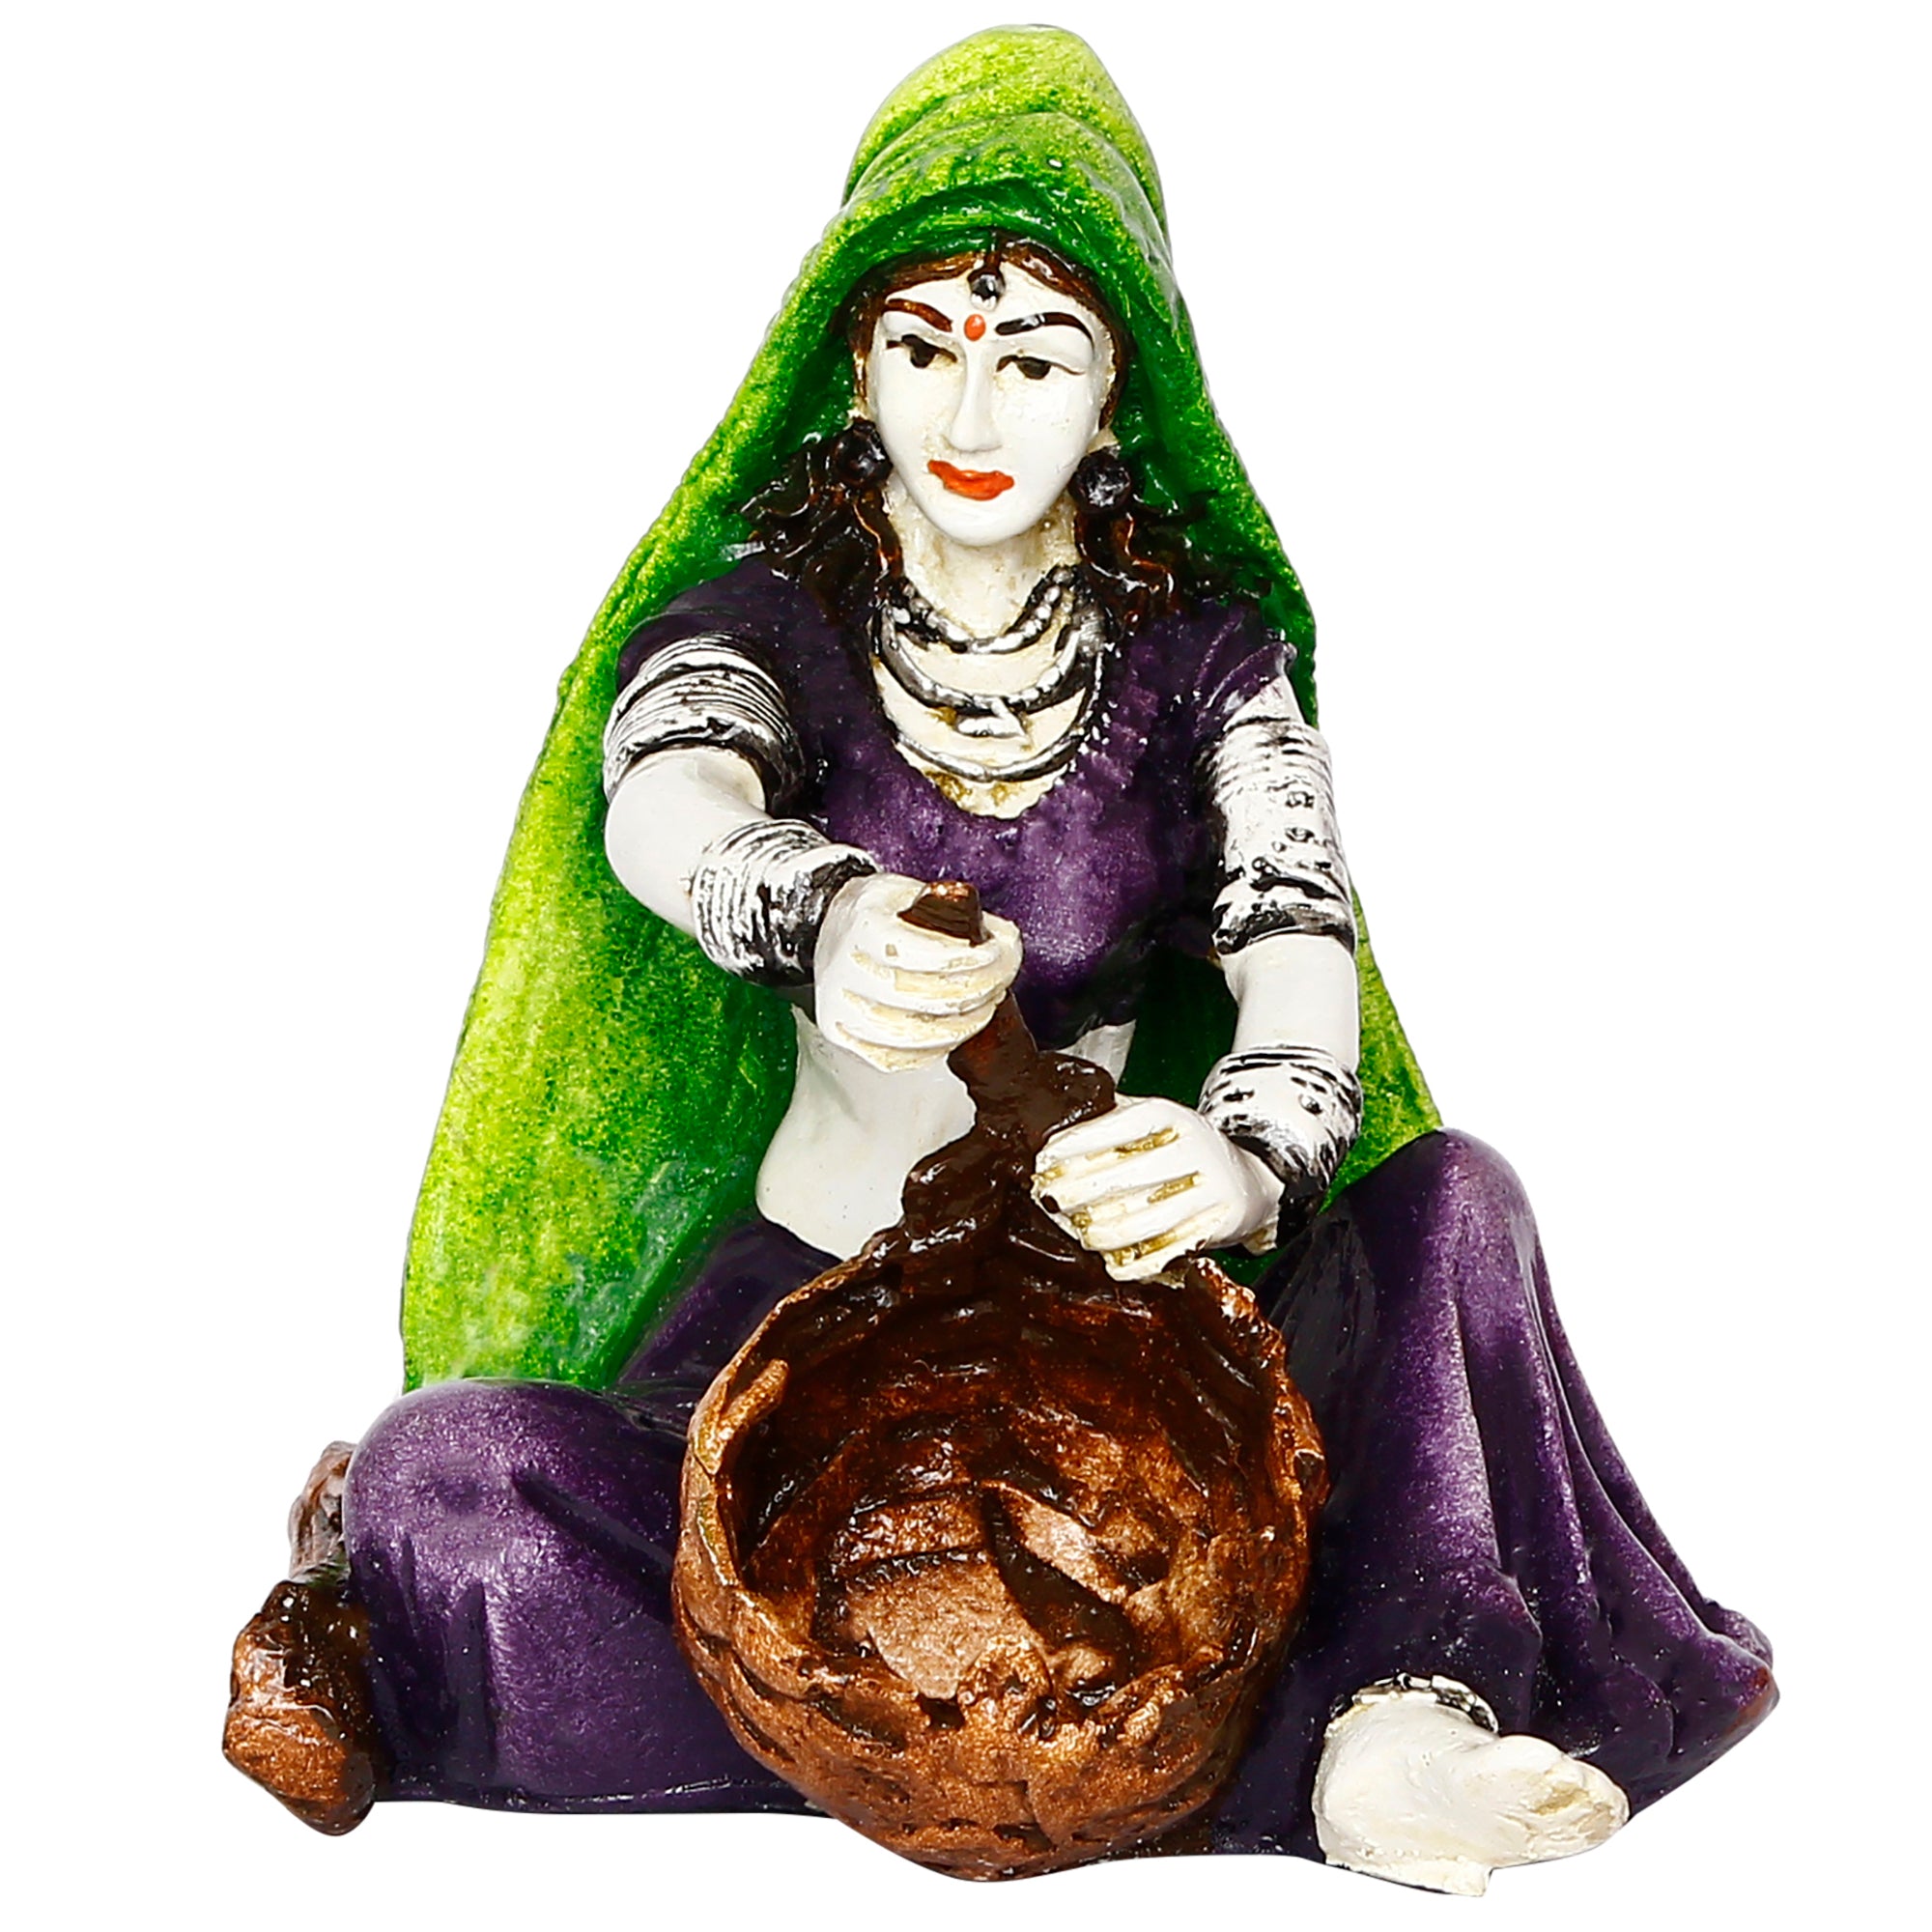 Polyresin Rajasthani Lady Creating Craft Product Handcrafted Human Figurine Decorative Showpiece 4